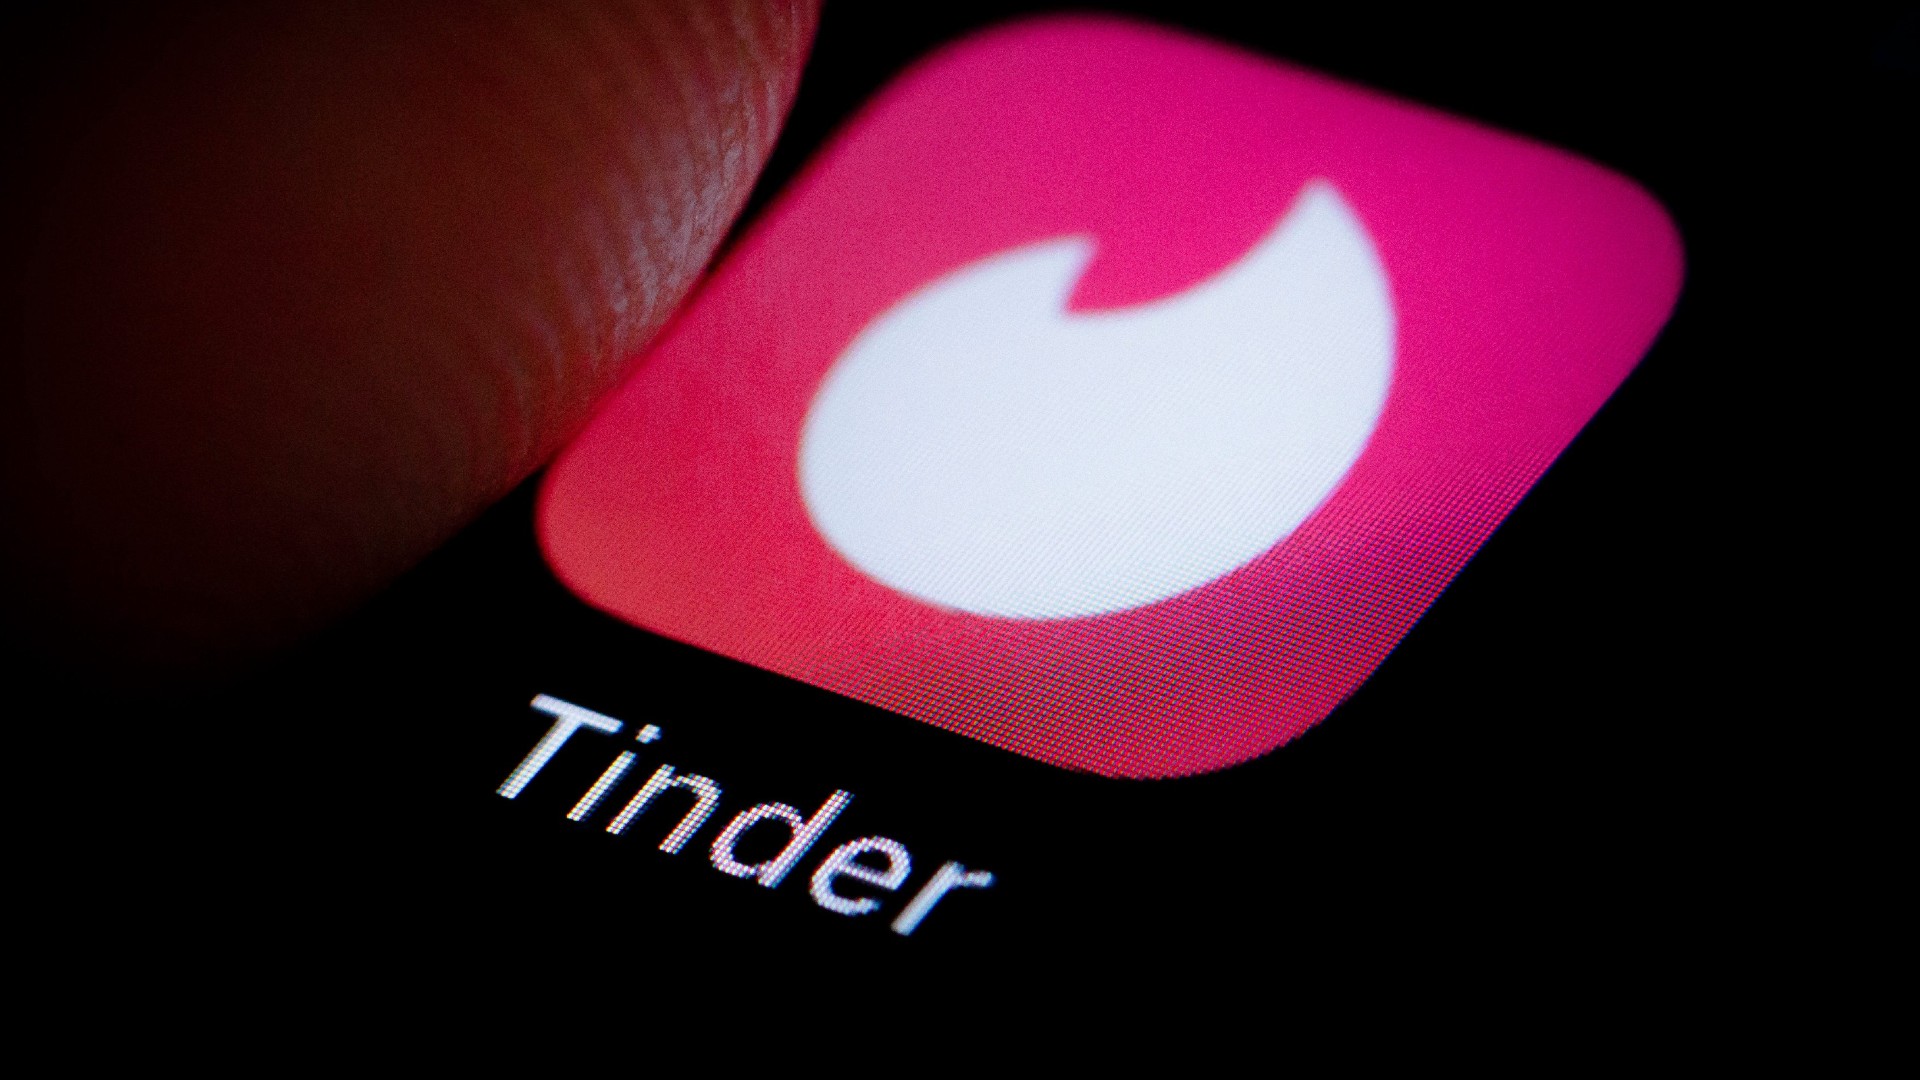 Tinder Will Give 500 Lucky Matches Free COVID Tests